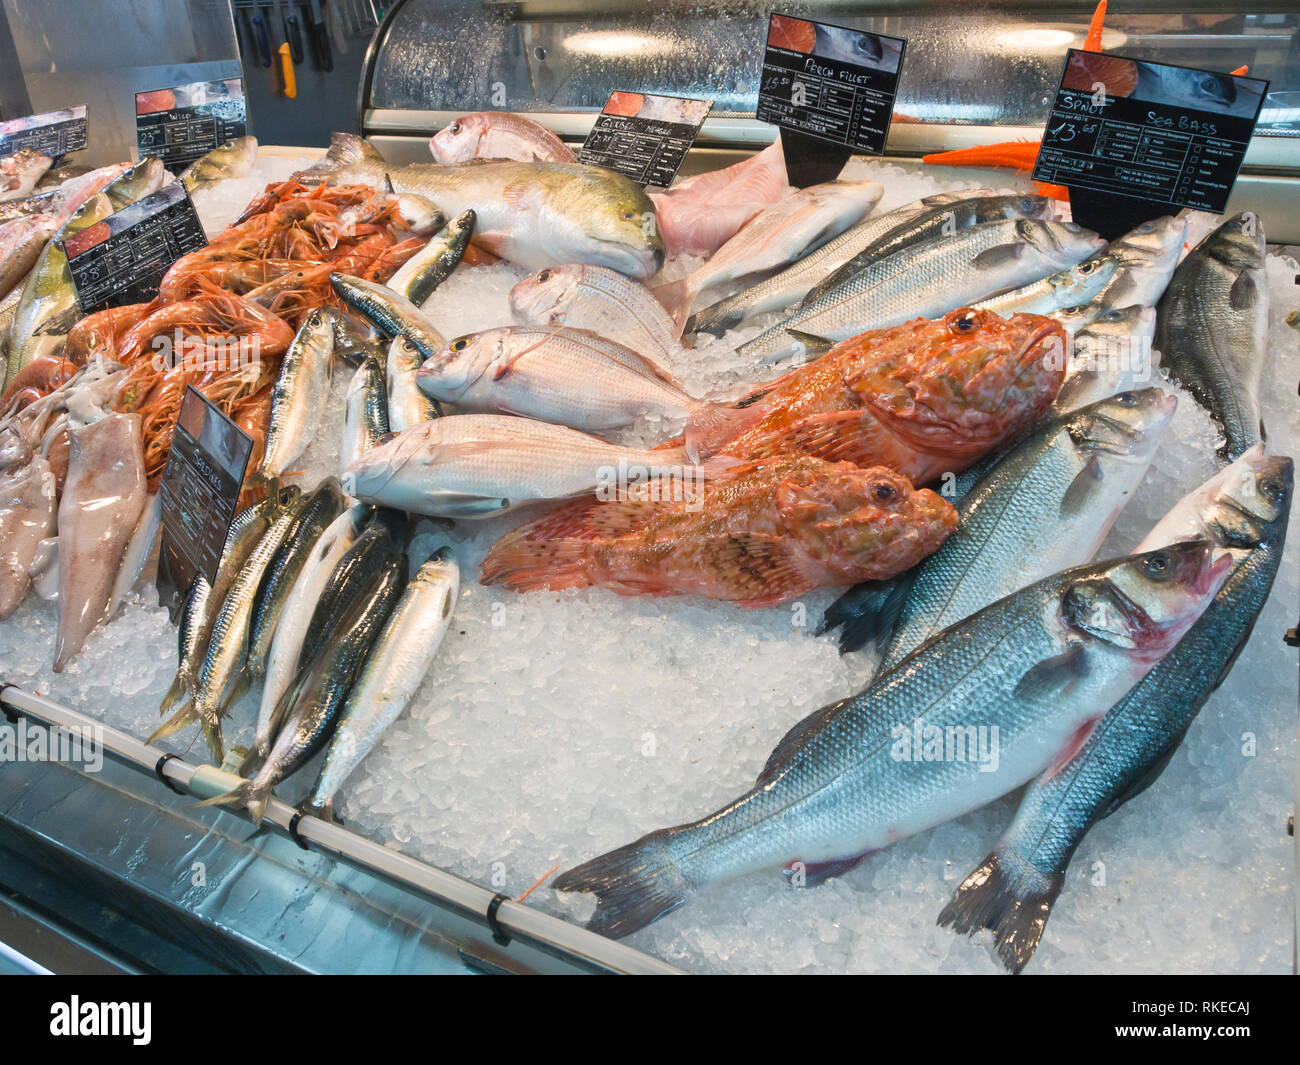 Display of fresh fish and seafood in a supermarket in Malta Stock Photo